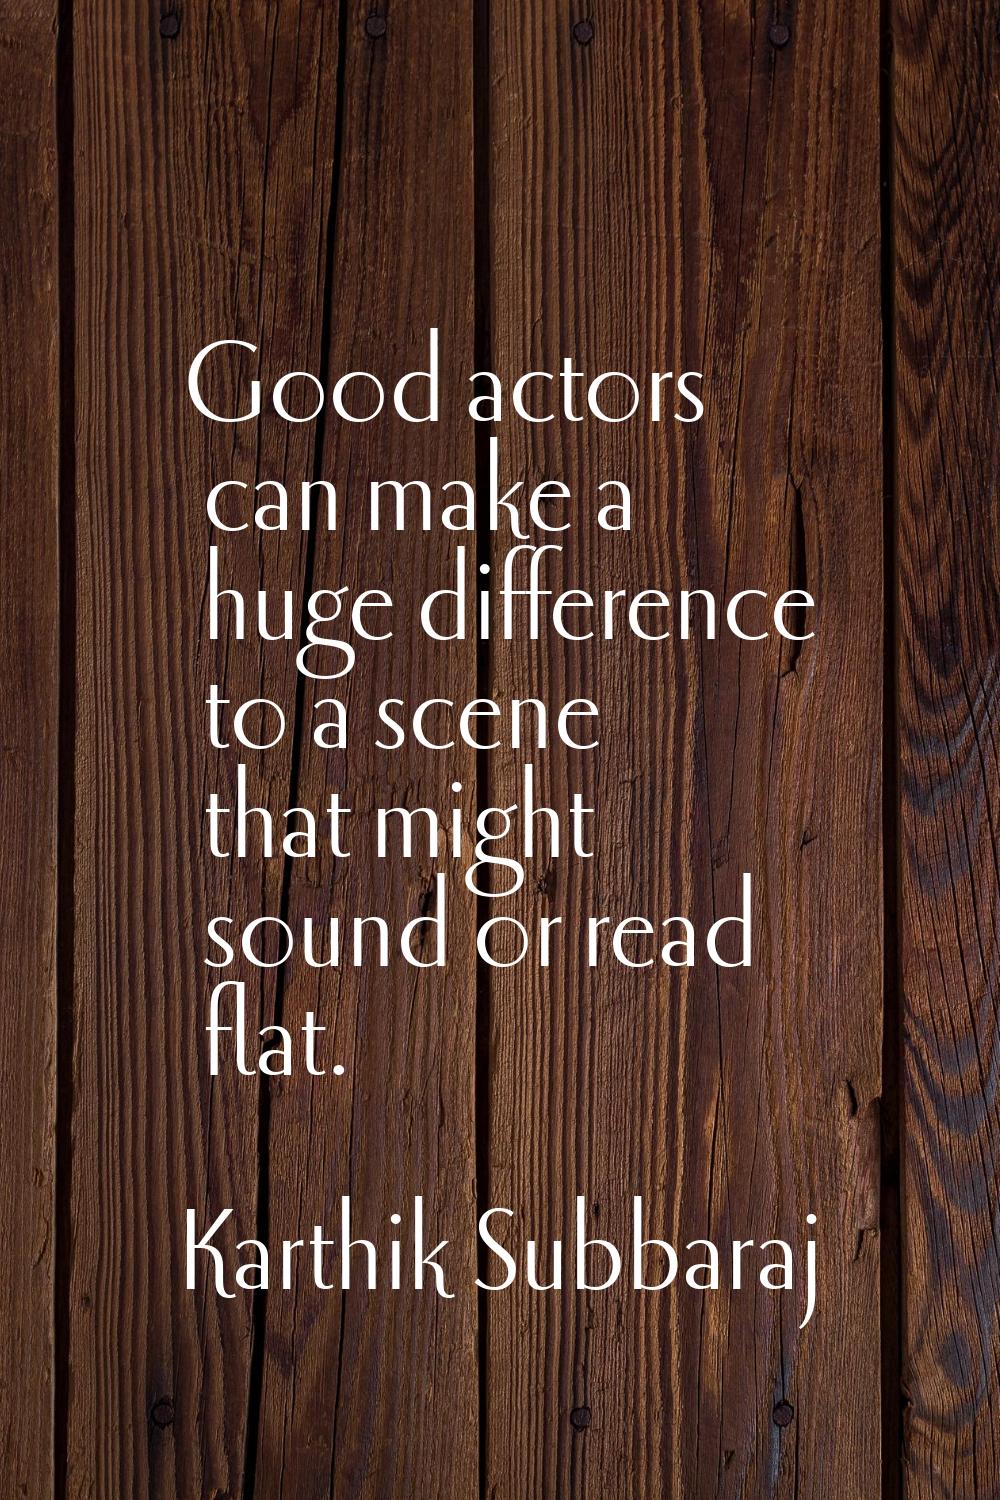 Good actors can make a huge difference to a scene that might sound or read flat.